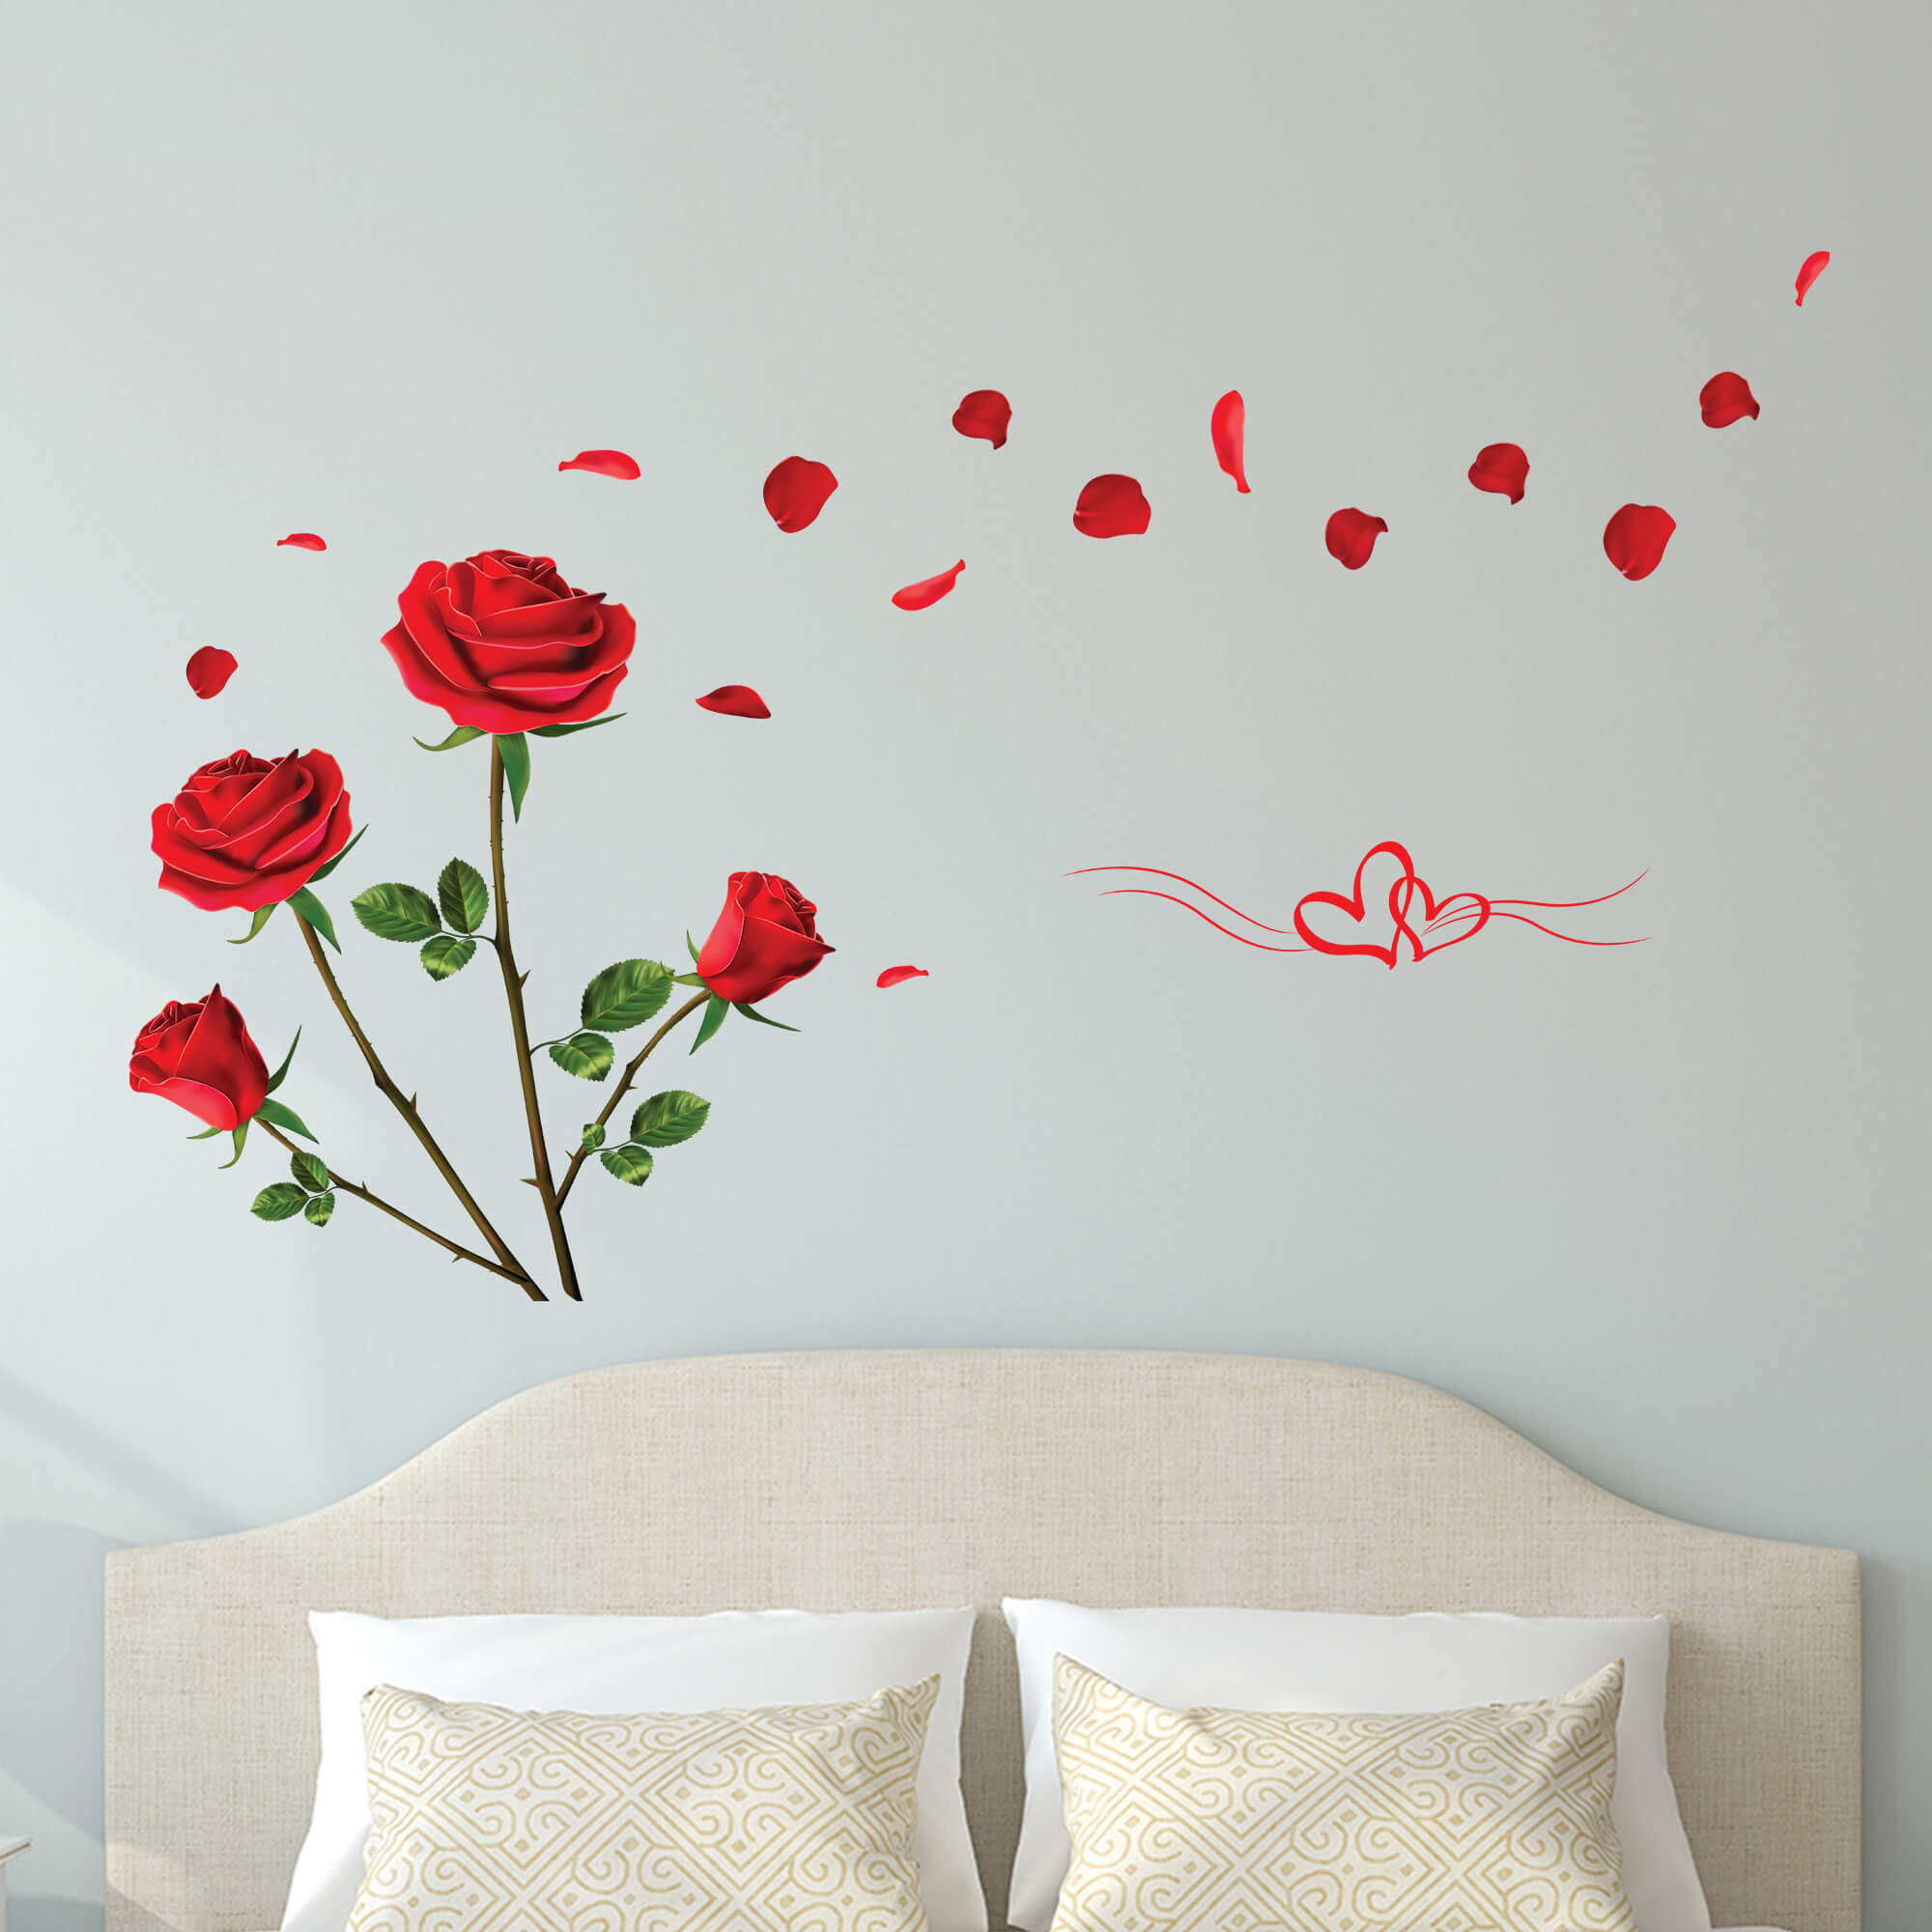 Warmth of rose - Wall Stickers & Decals by Asian Paints